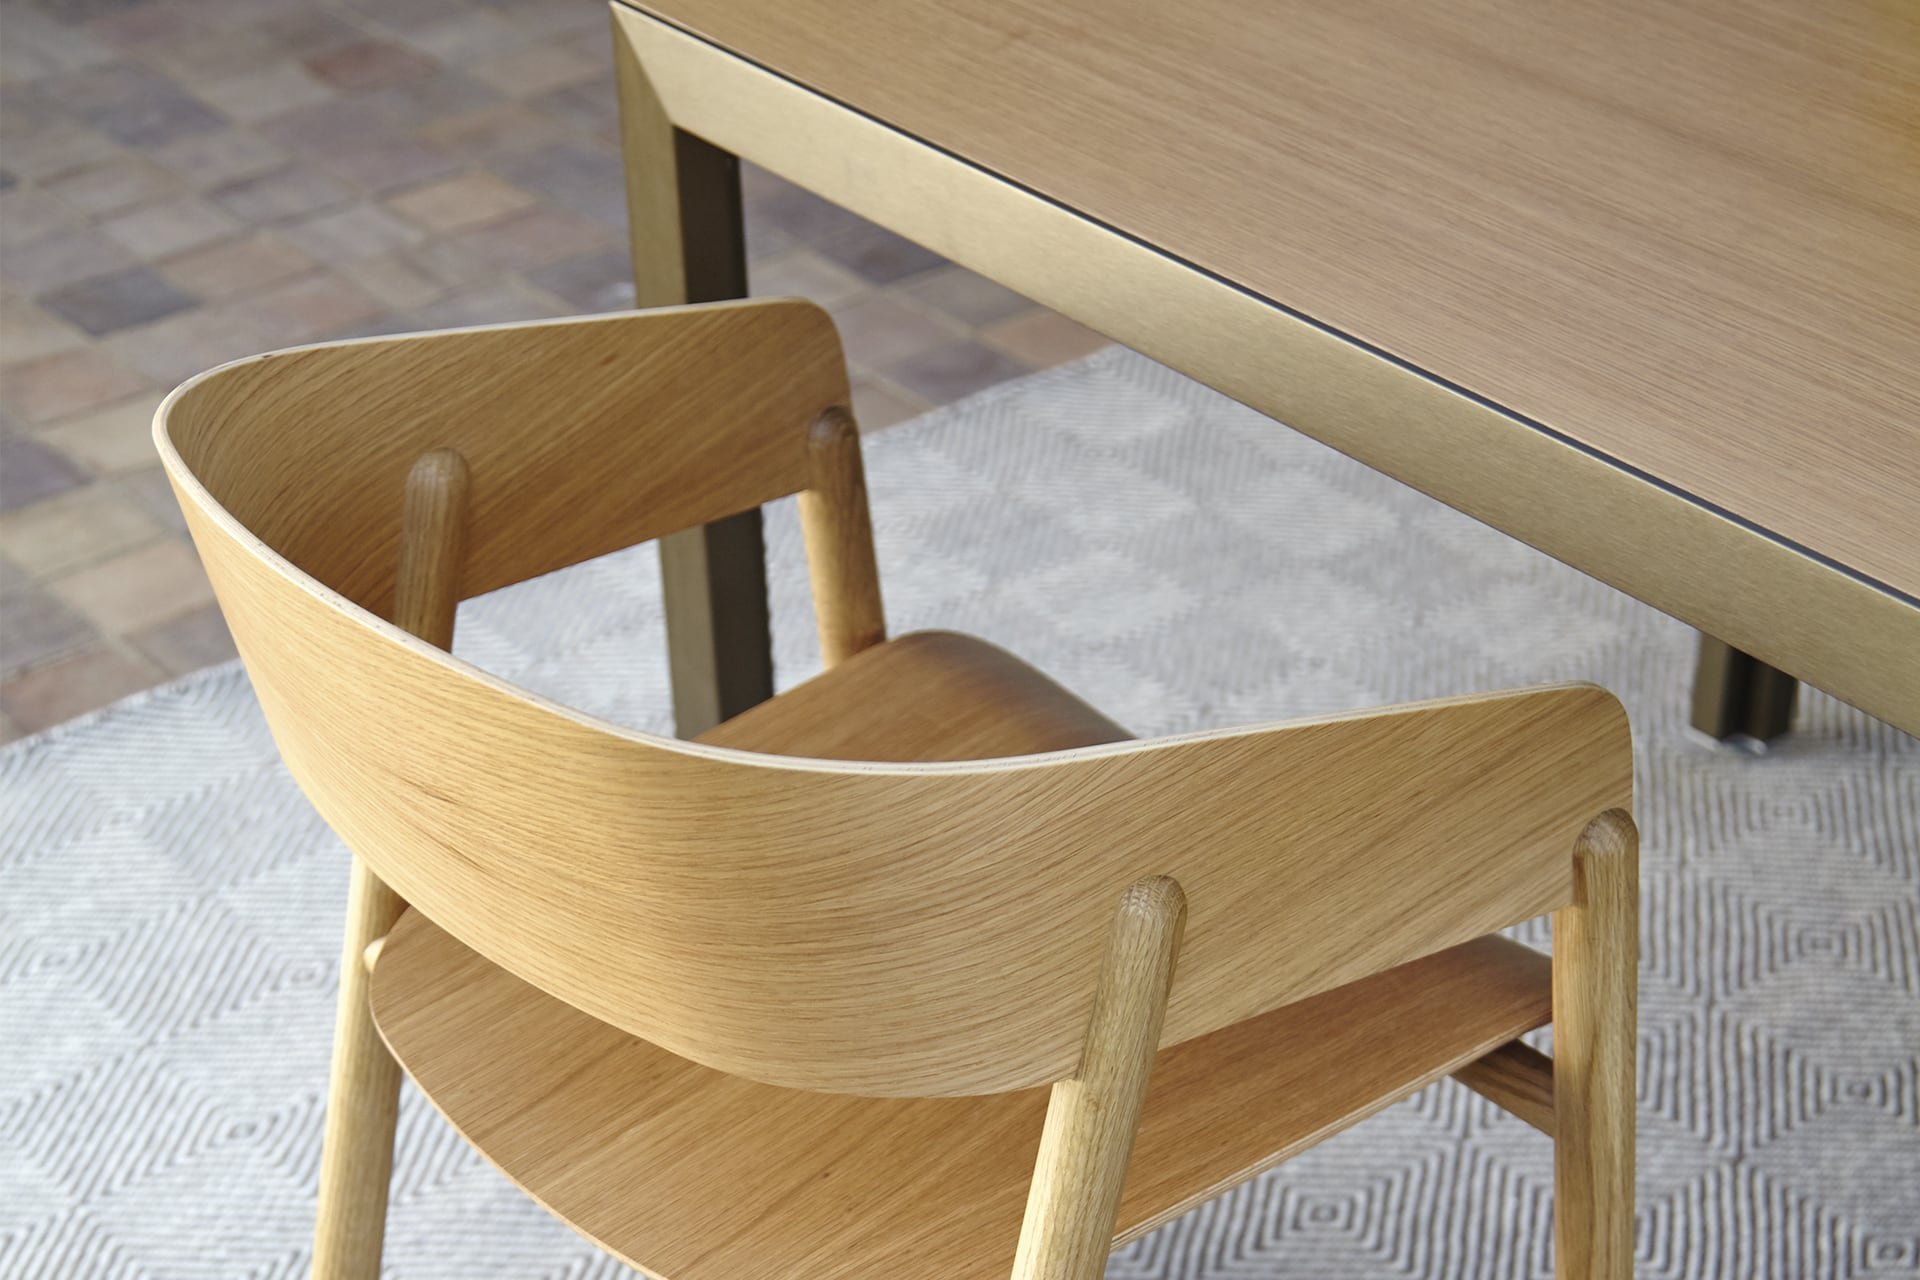 Mava Dining Chair from Punt Mobles, designed by Stephanie Jasny